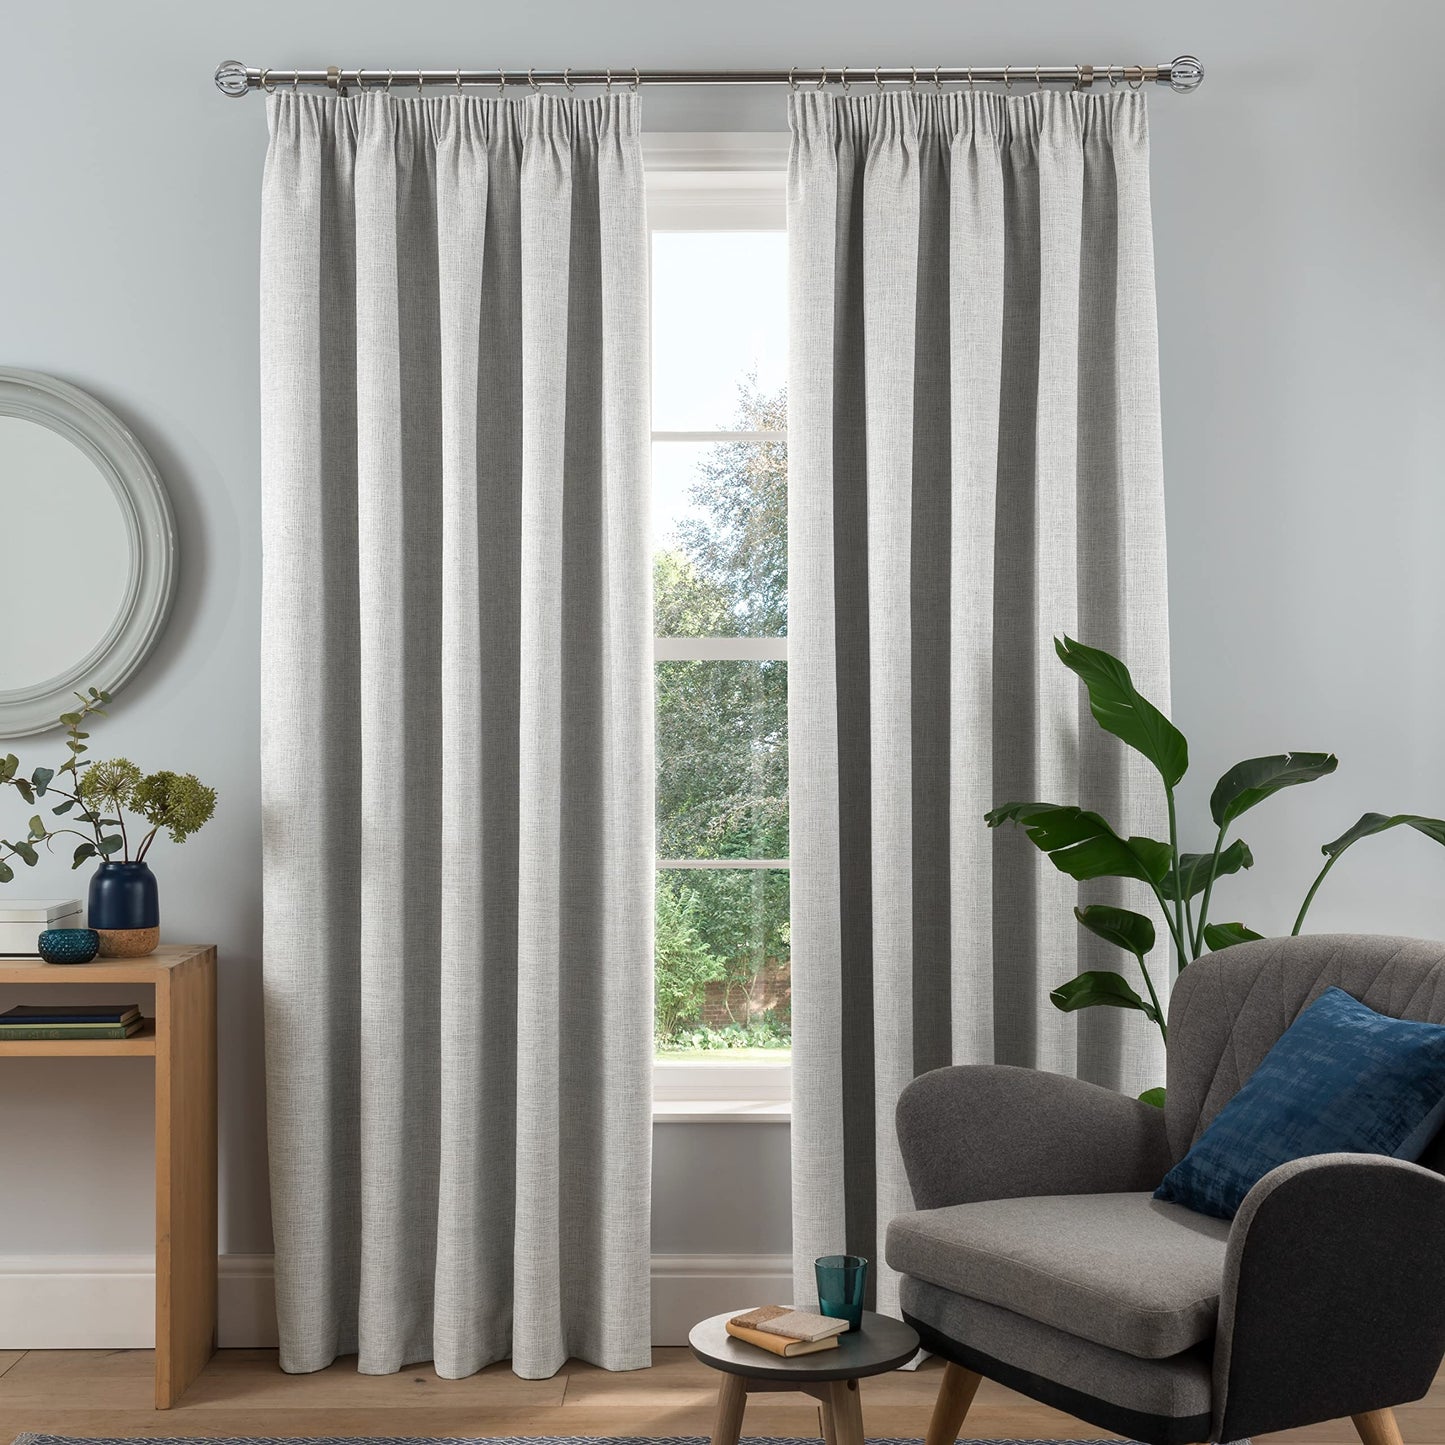 Textured Red Rib Weave - Pencil Pleat Blackout Lined Curtains